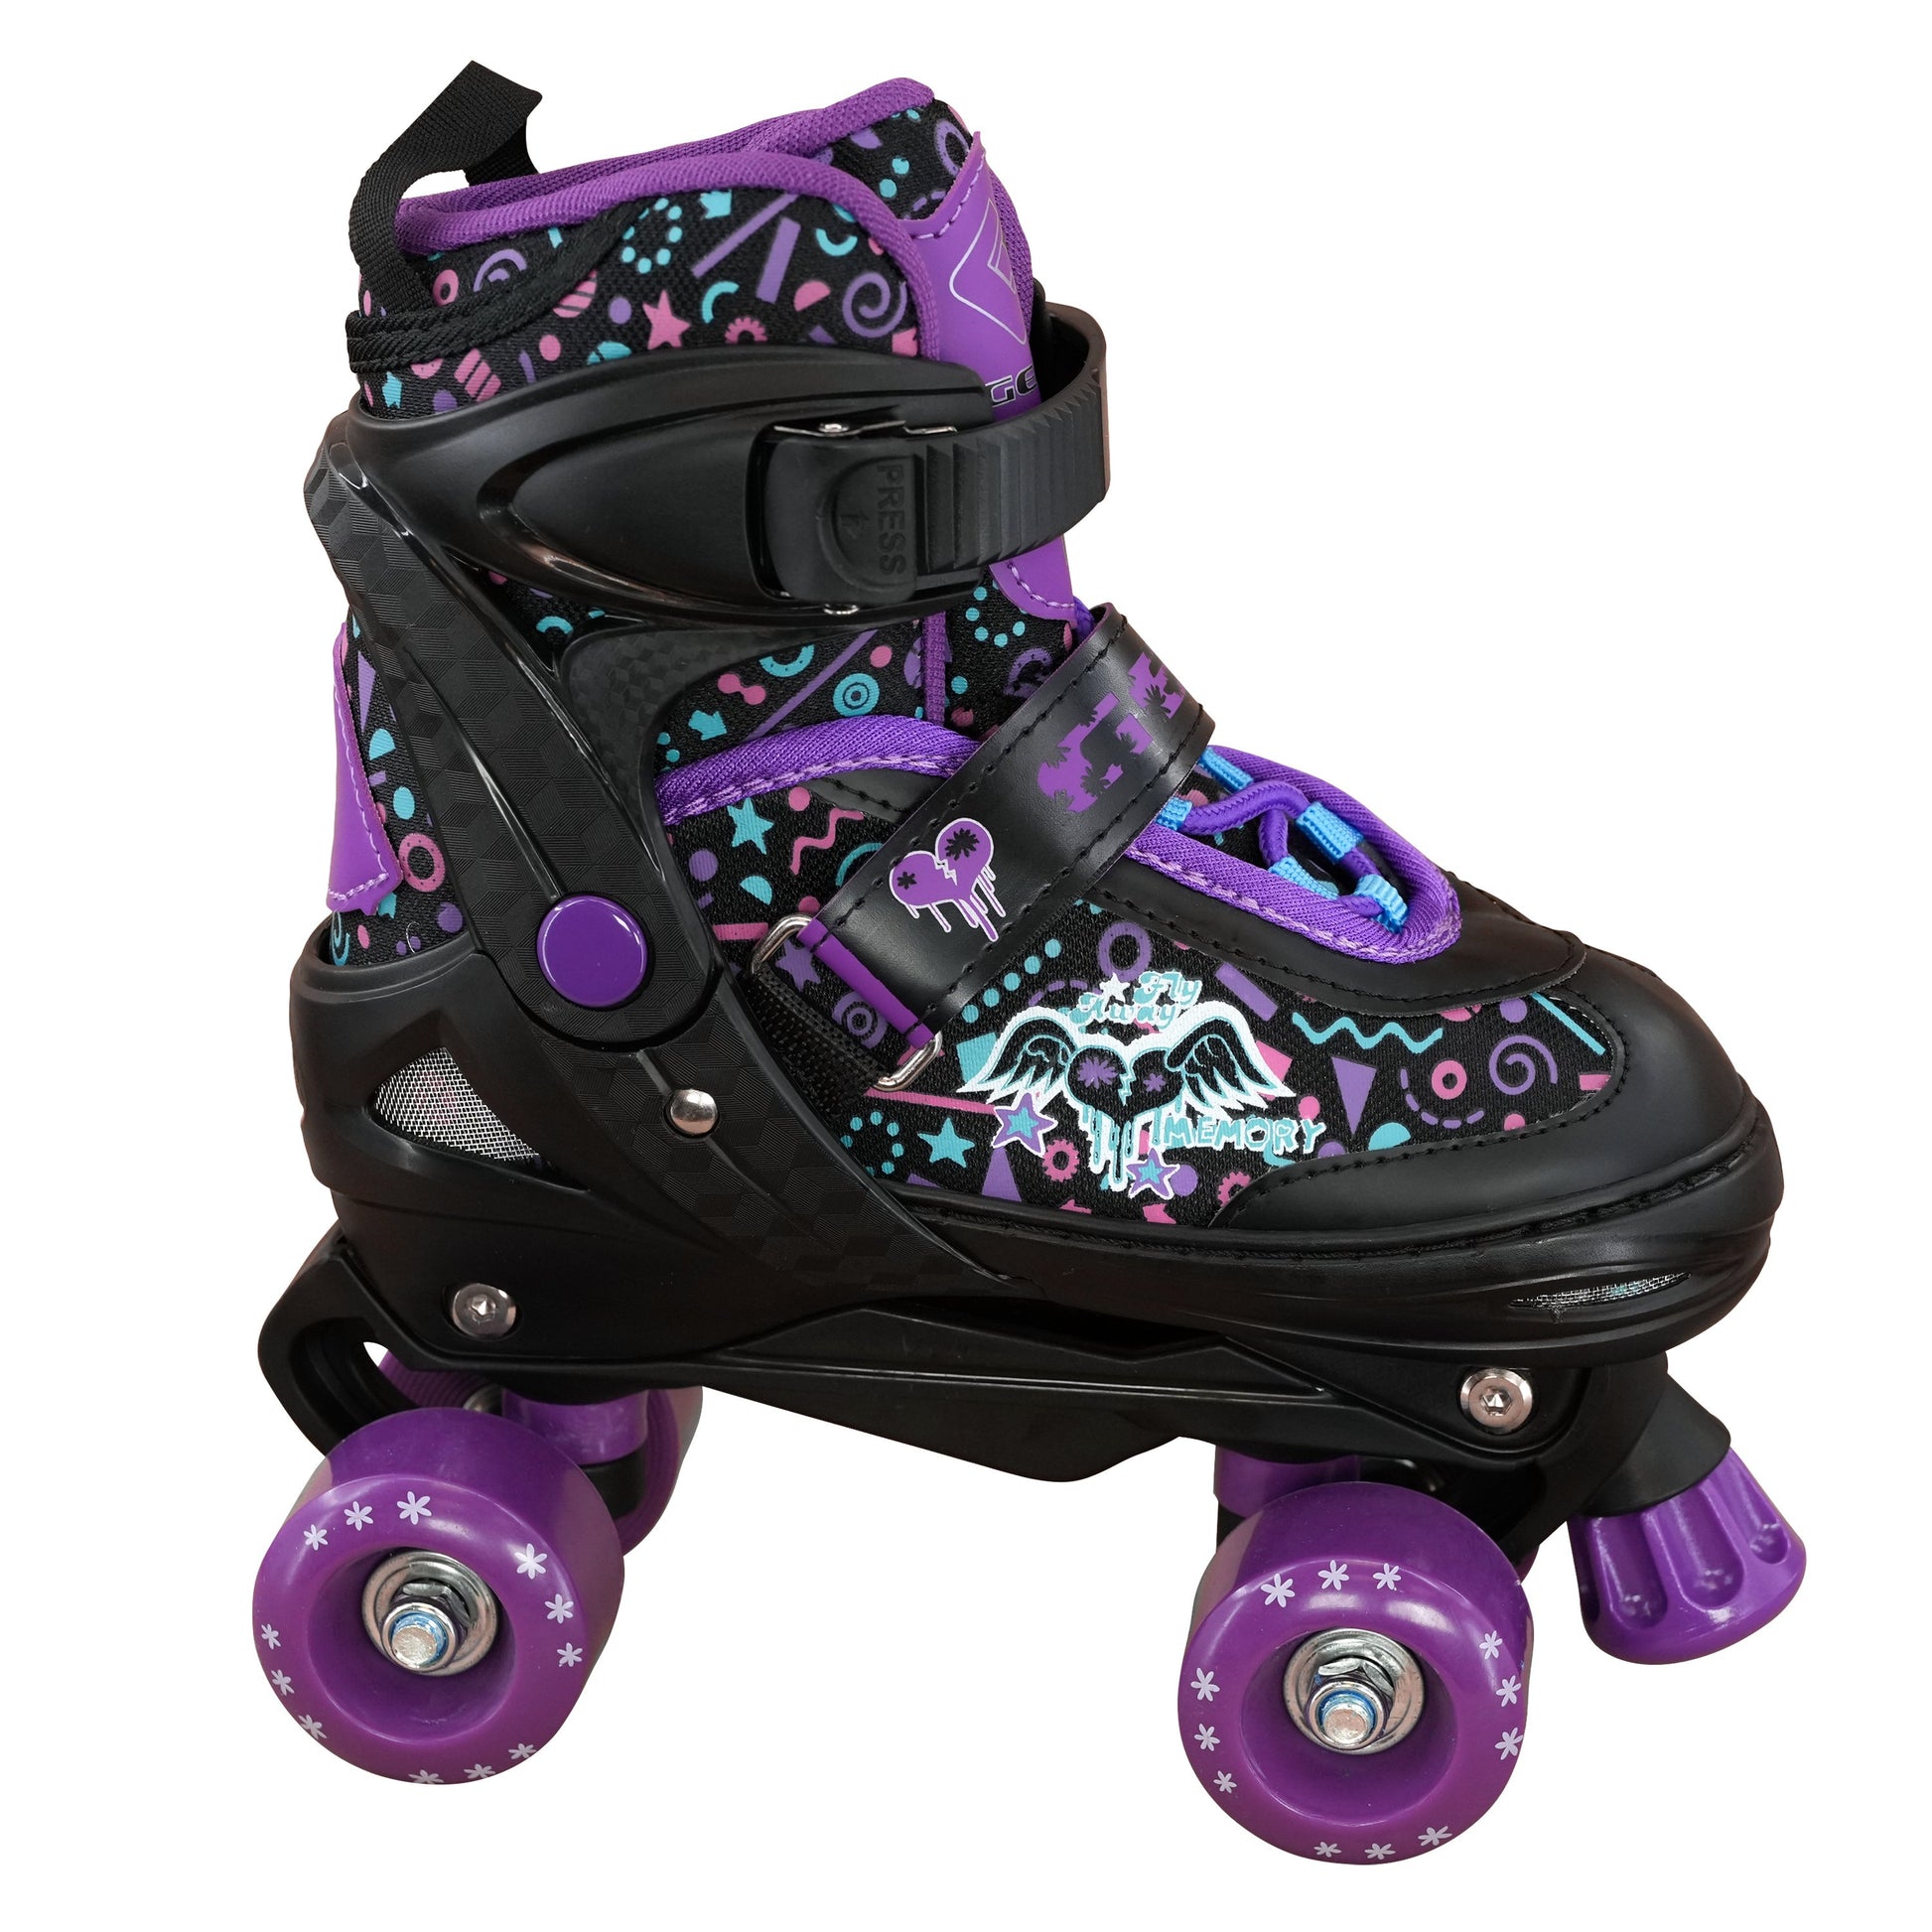 The Magic Toy Shop Roller Skate Purple Roller Skates for Kids with 4 Wheel